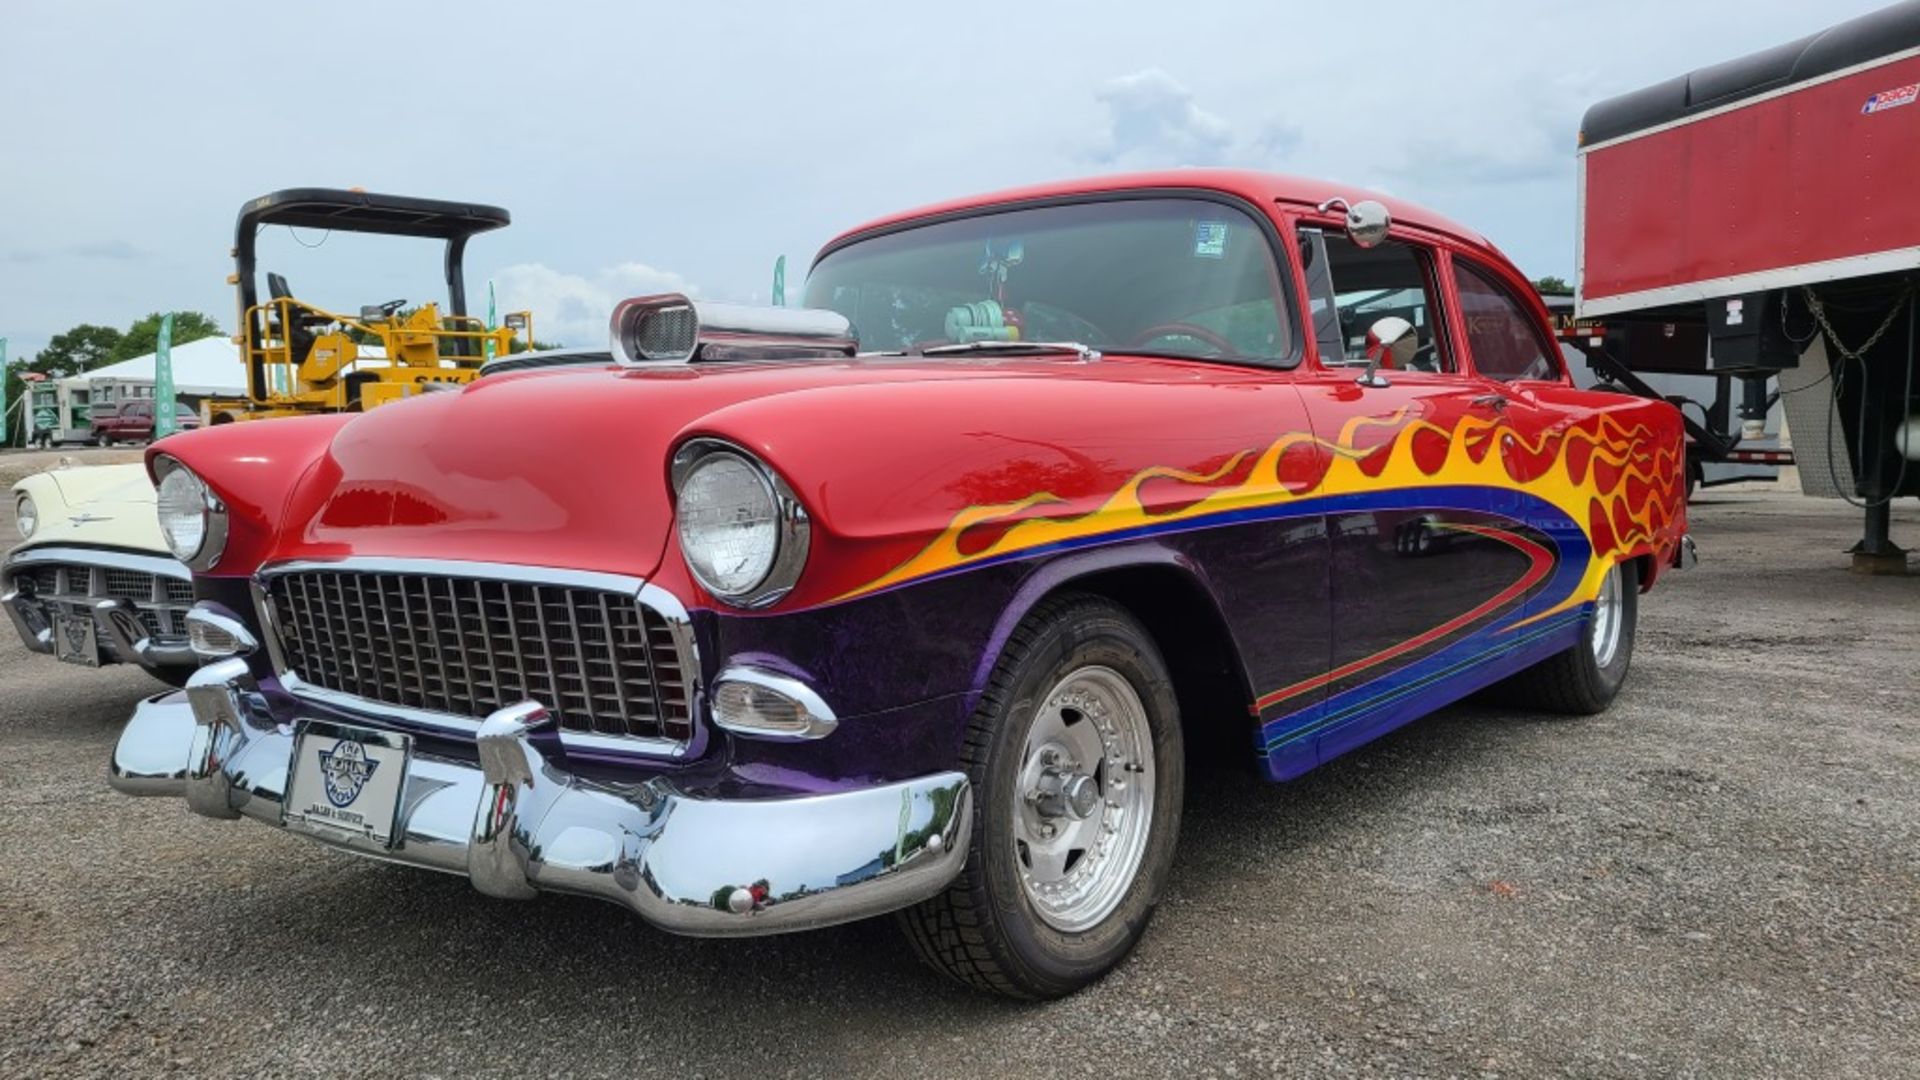 1955 Chevy Bel Air - Image 3 of 13